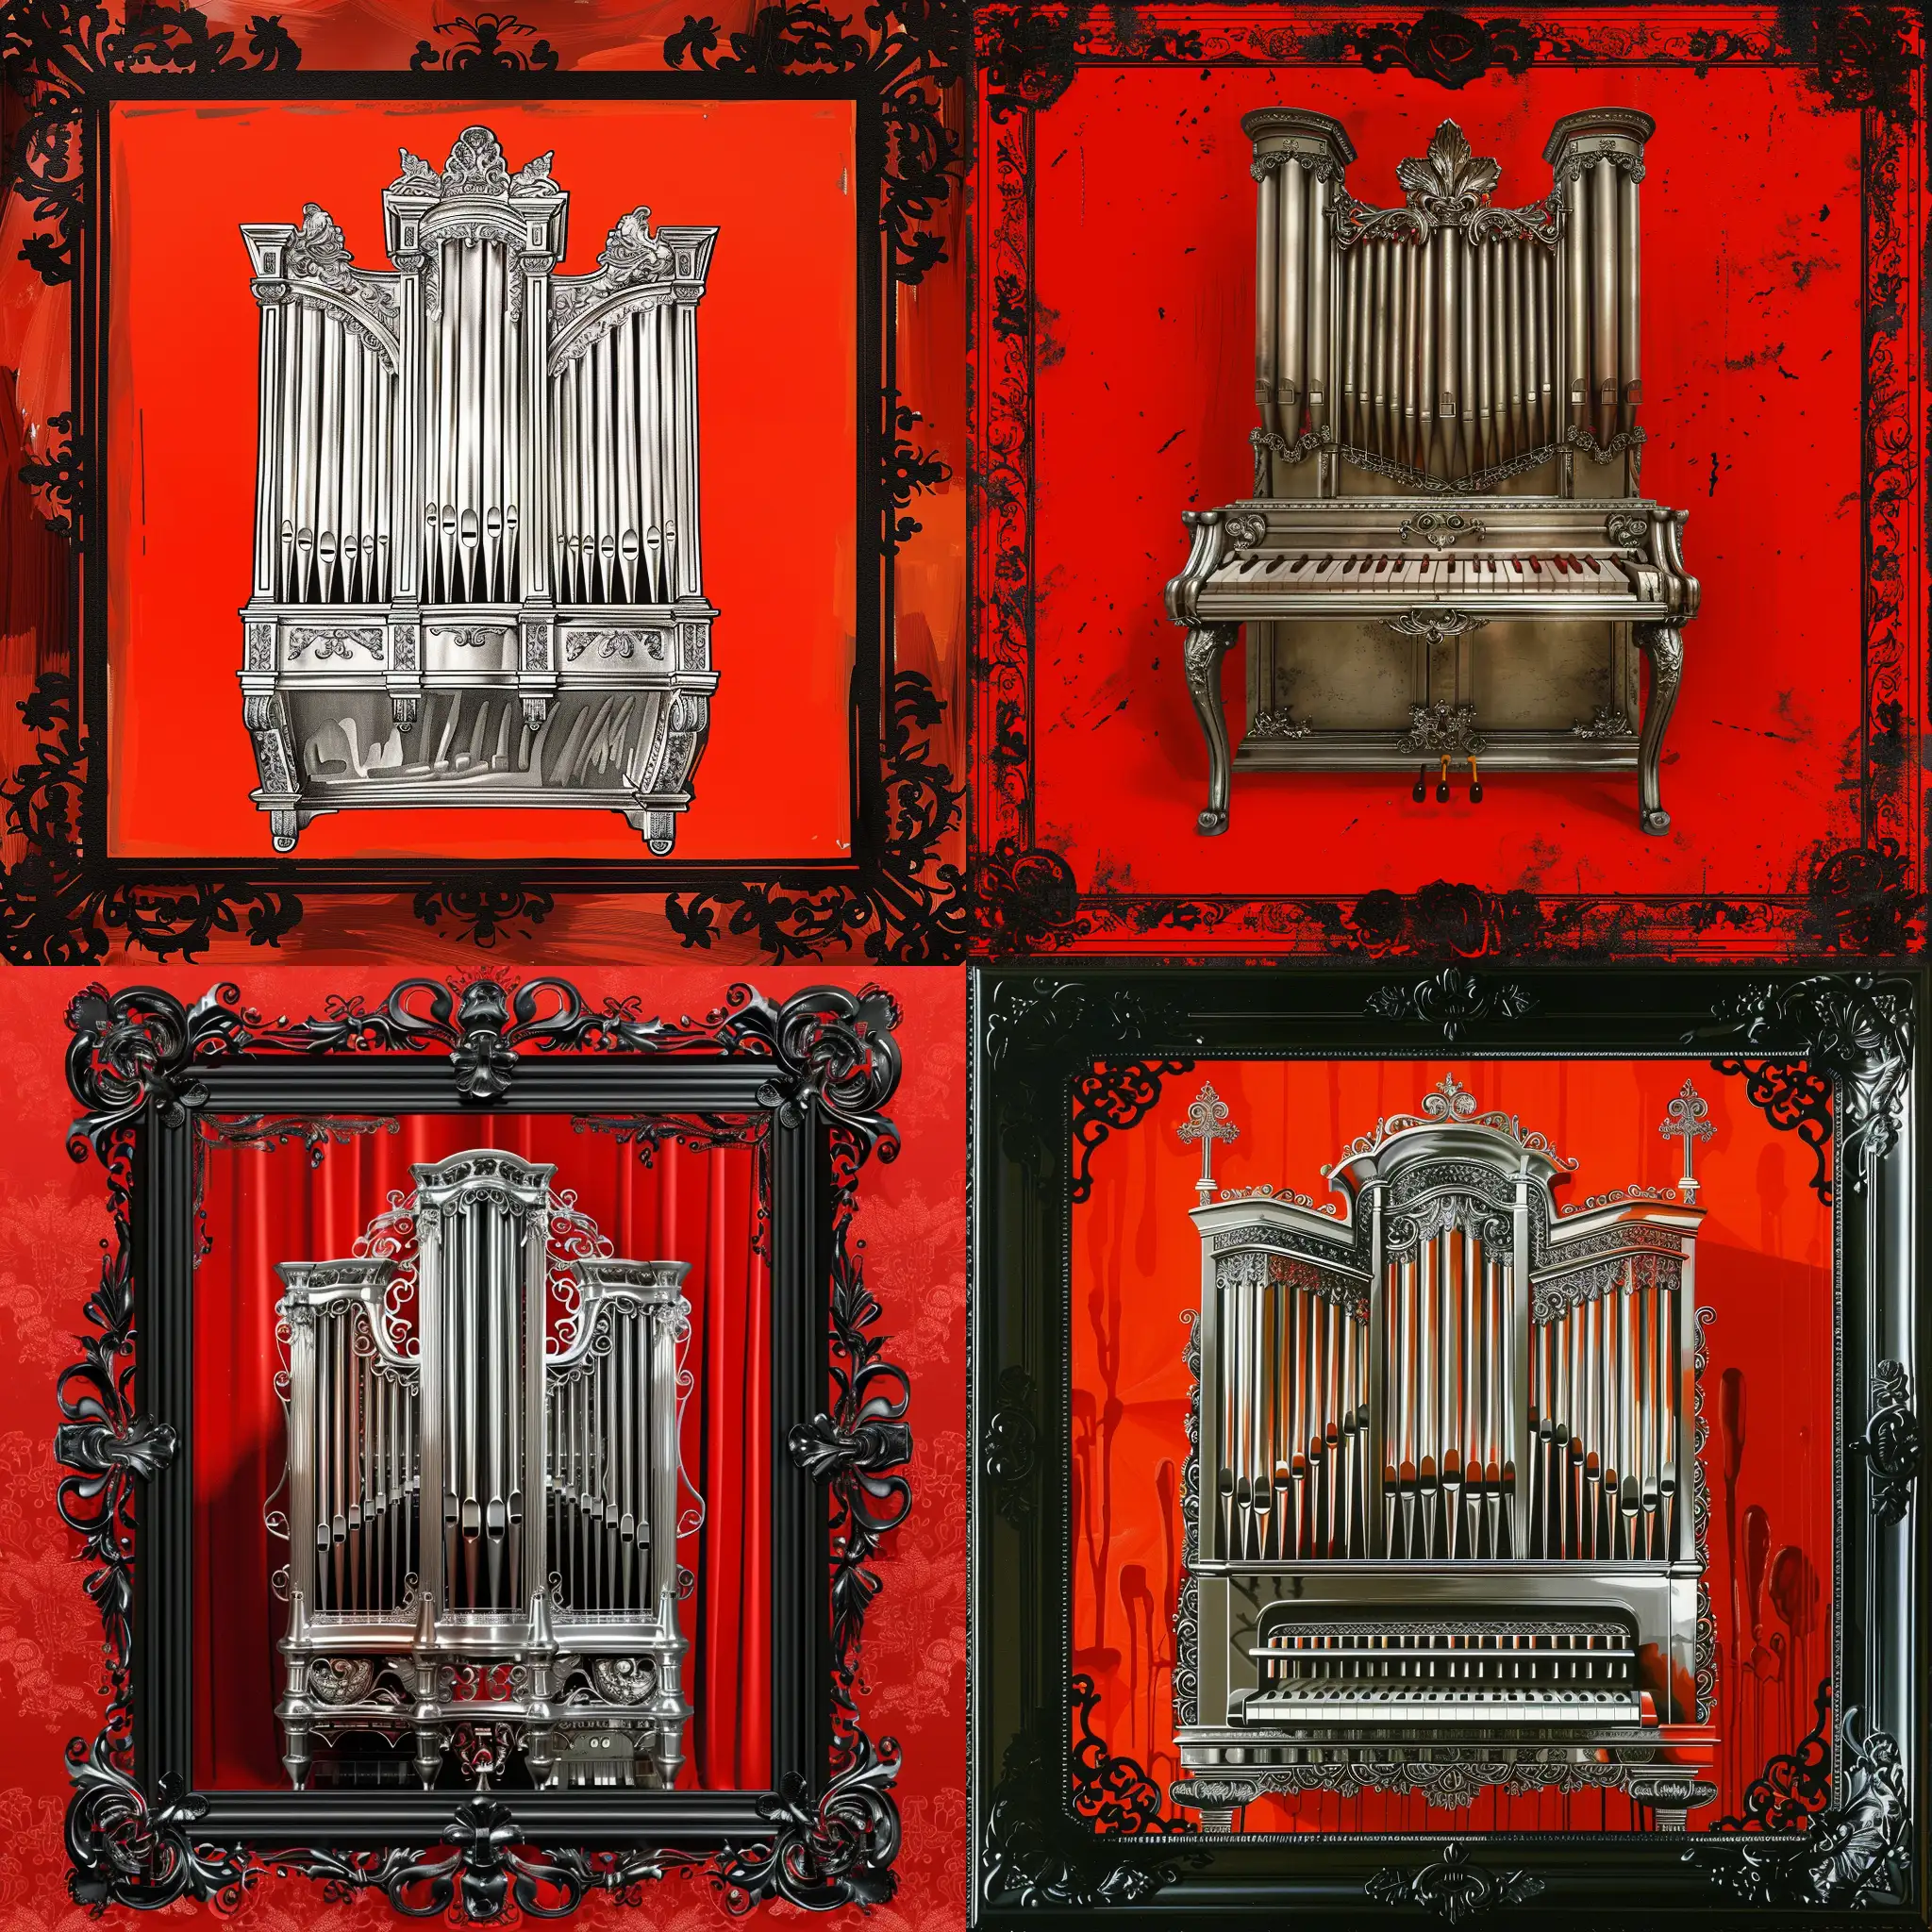 A silver slavic organ, on a bright red background, framed with black faint delicate filigree, clean digital painting